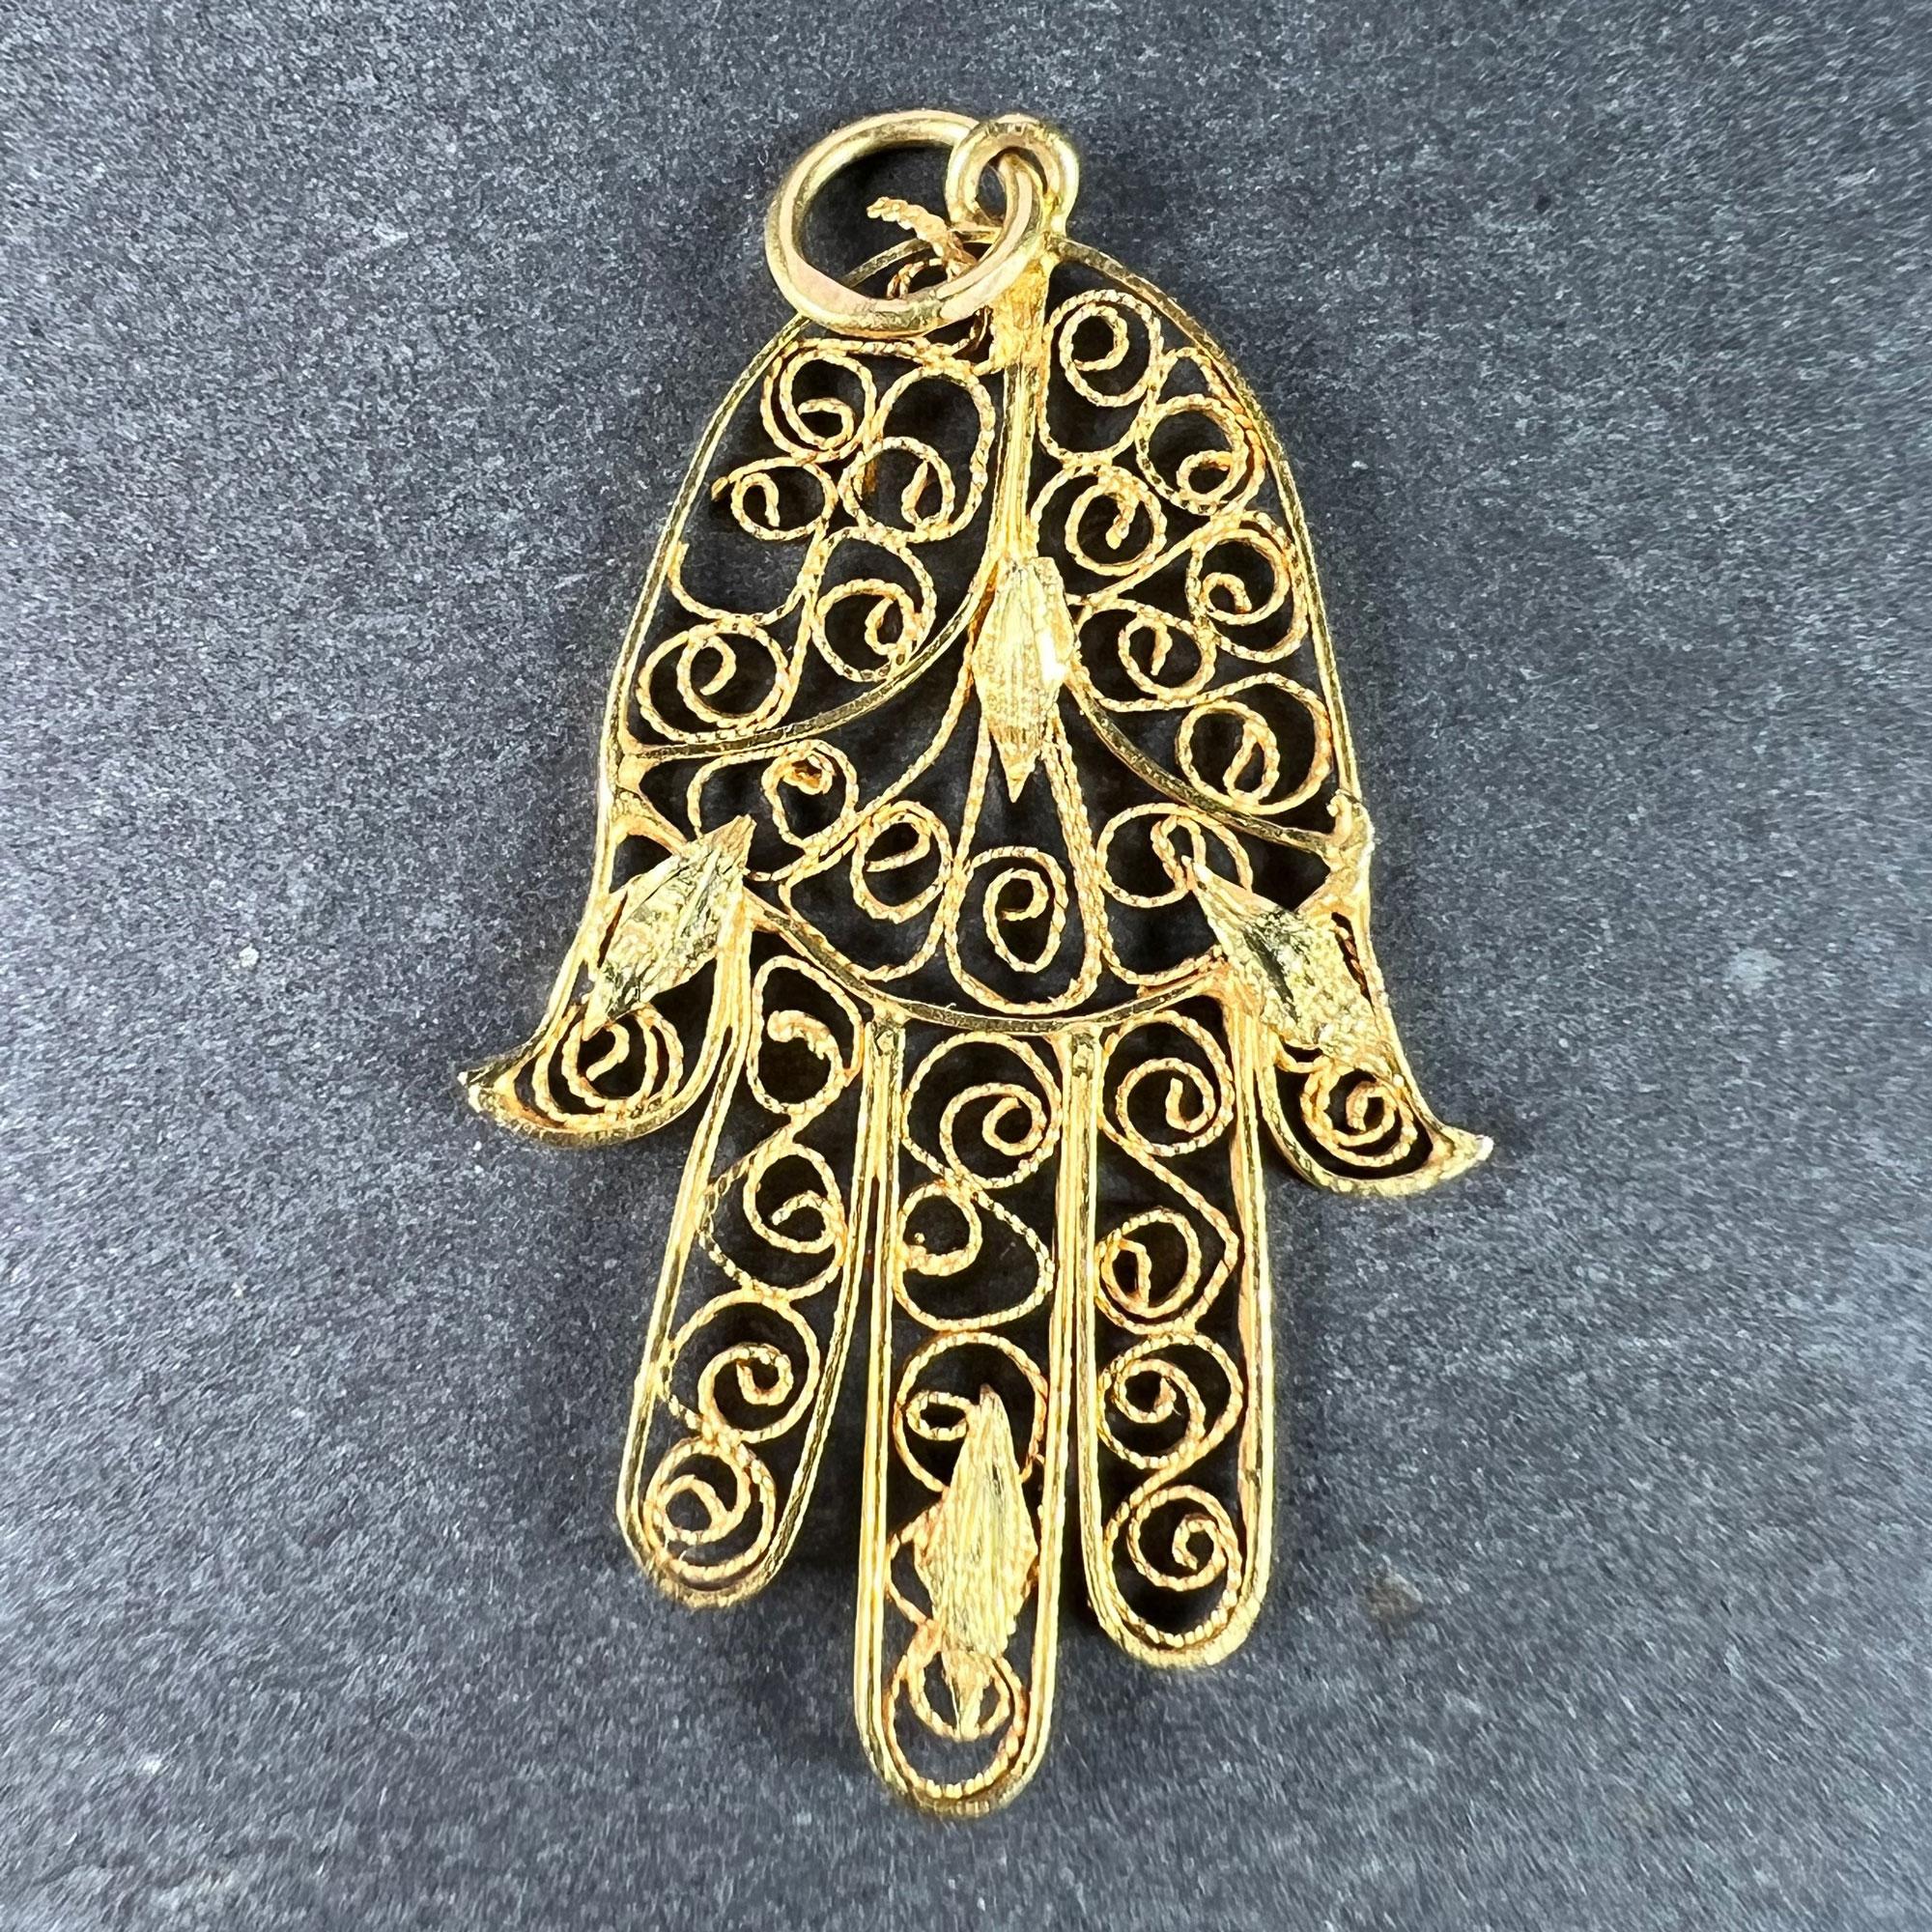 A French 18 karat (18K) yellow gold charm pendant designed as the protective amulet of a Hamsa hand, with twisted filigree wirework filling the frame. Stamped with the horse's head for French manufacture and 18 karat gold.
 
Dimensions: 2.9 x 1.8 x